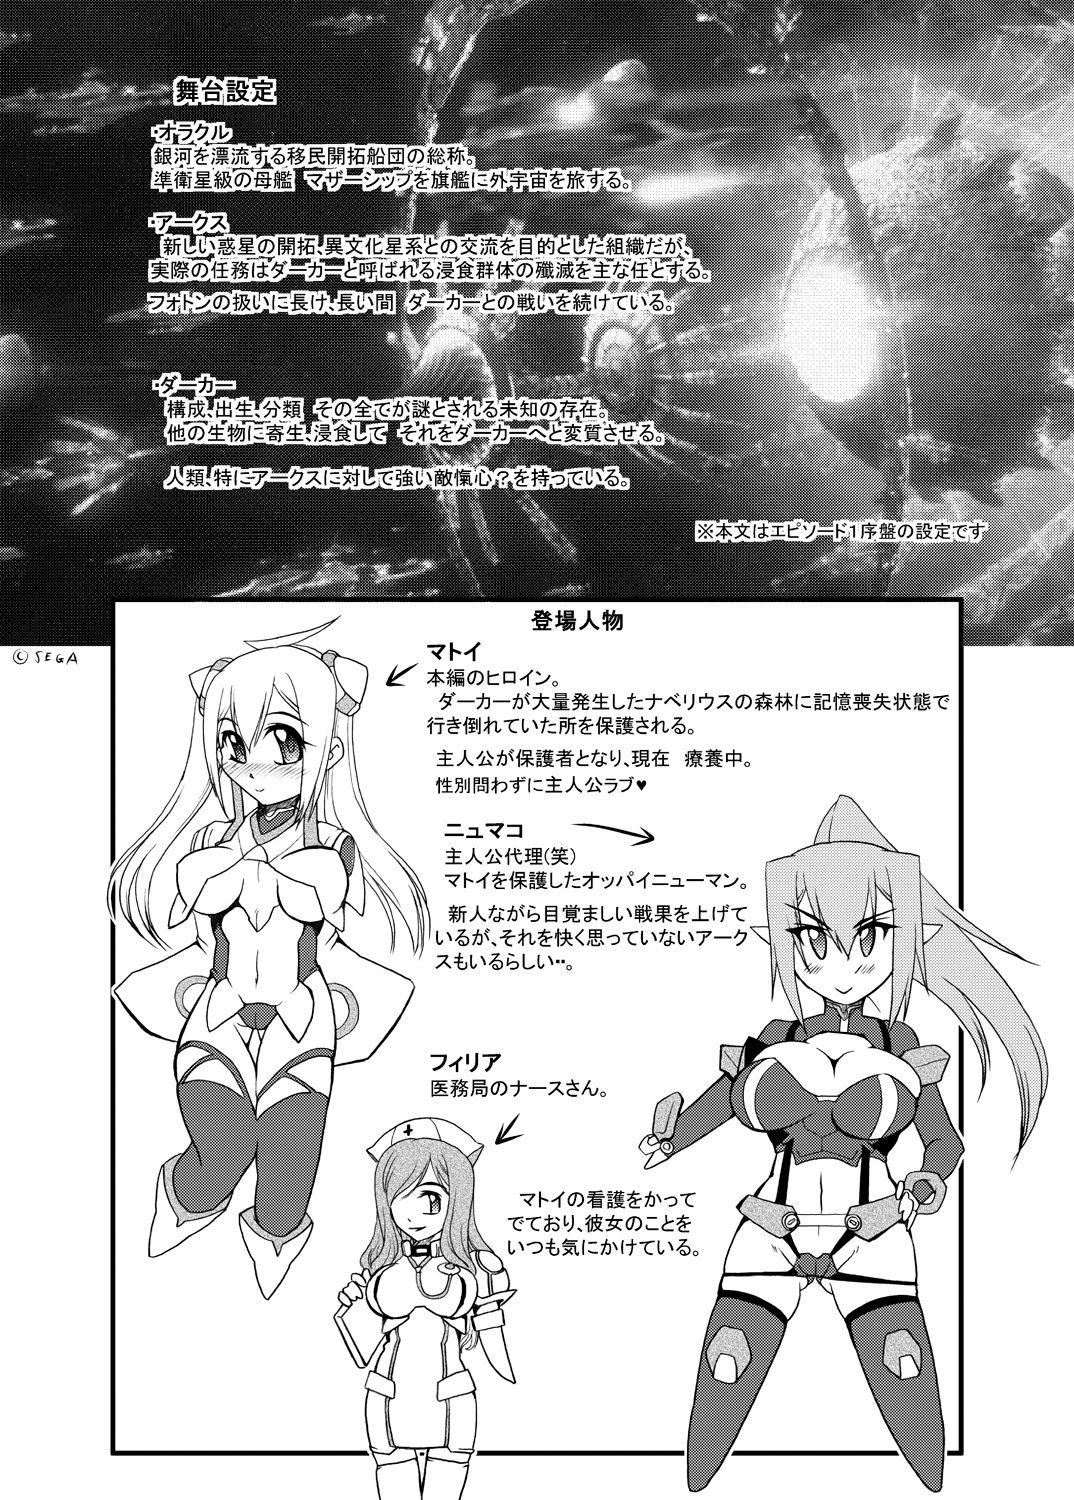 Granny MATTER BOARD X - Phantasy star online 2 Family Roleplay - Page 4